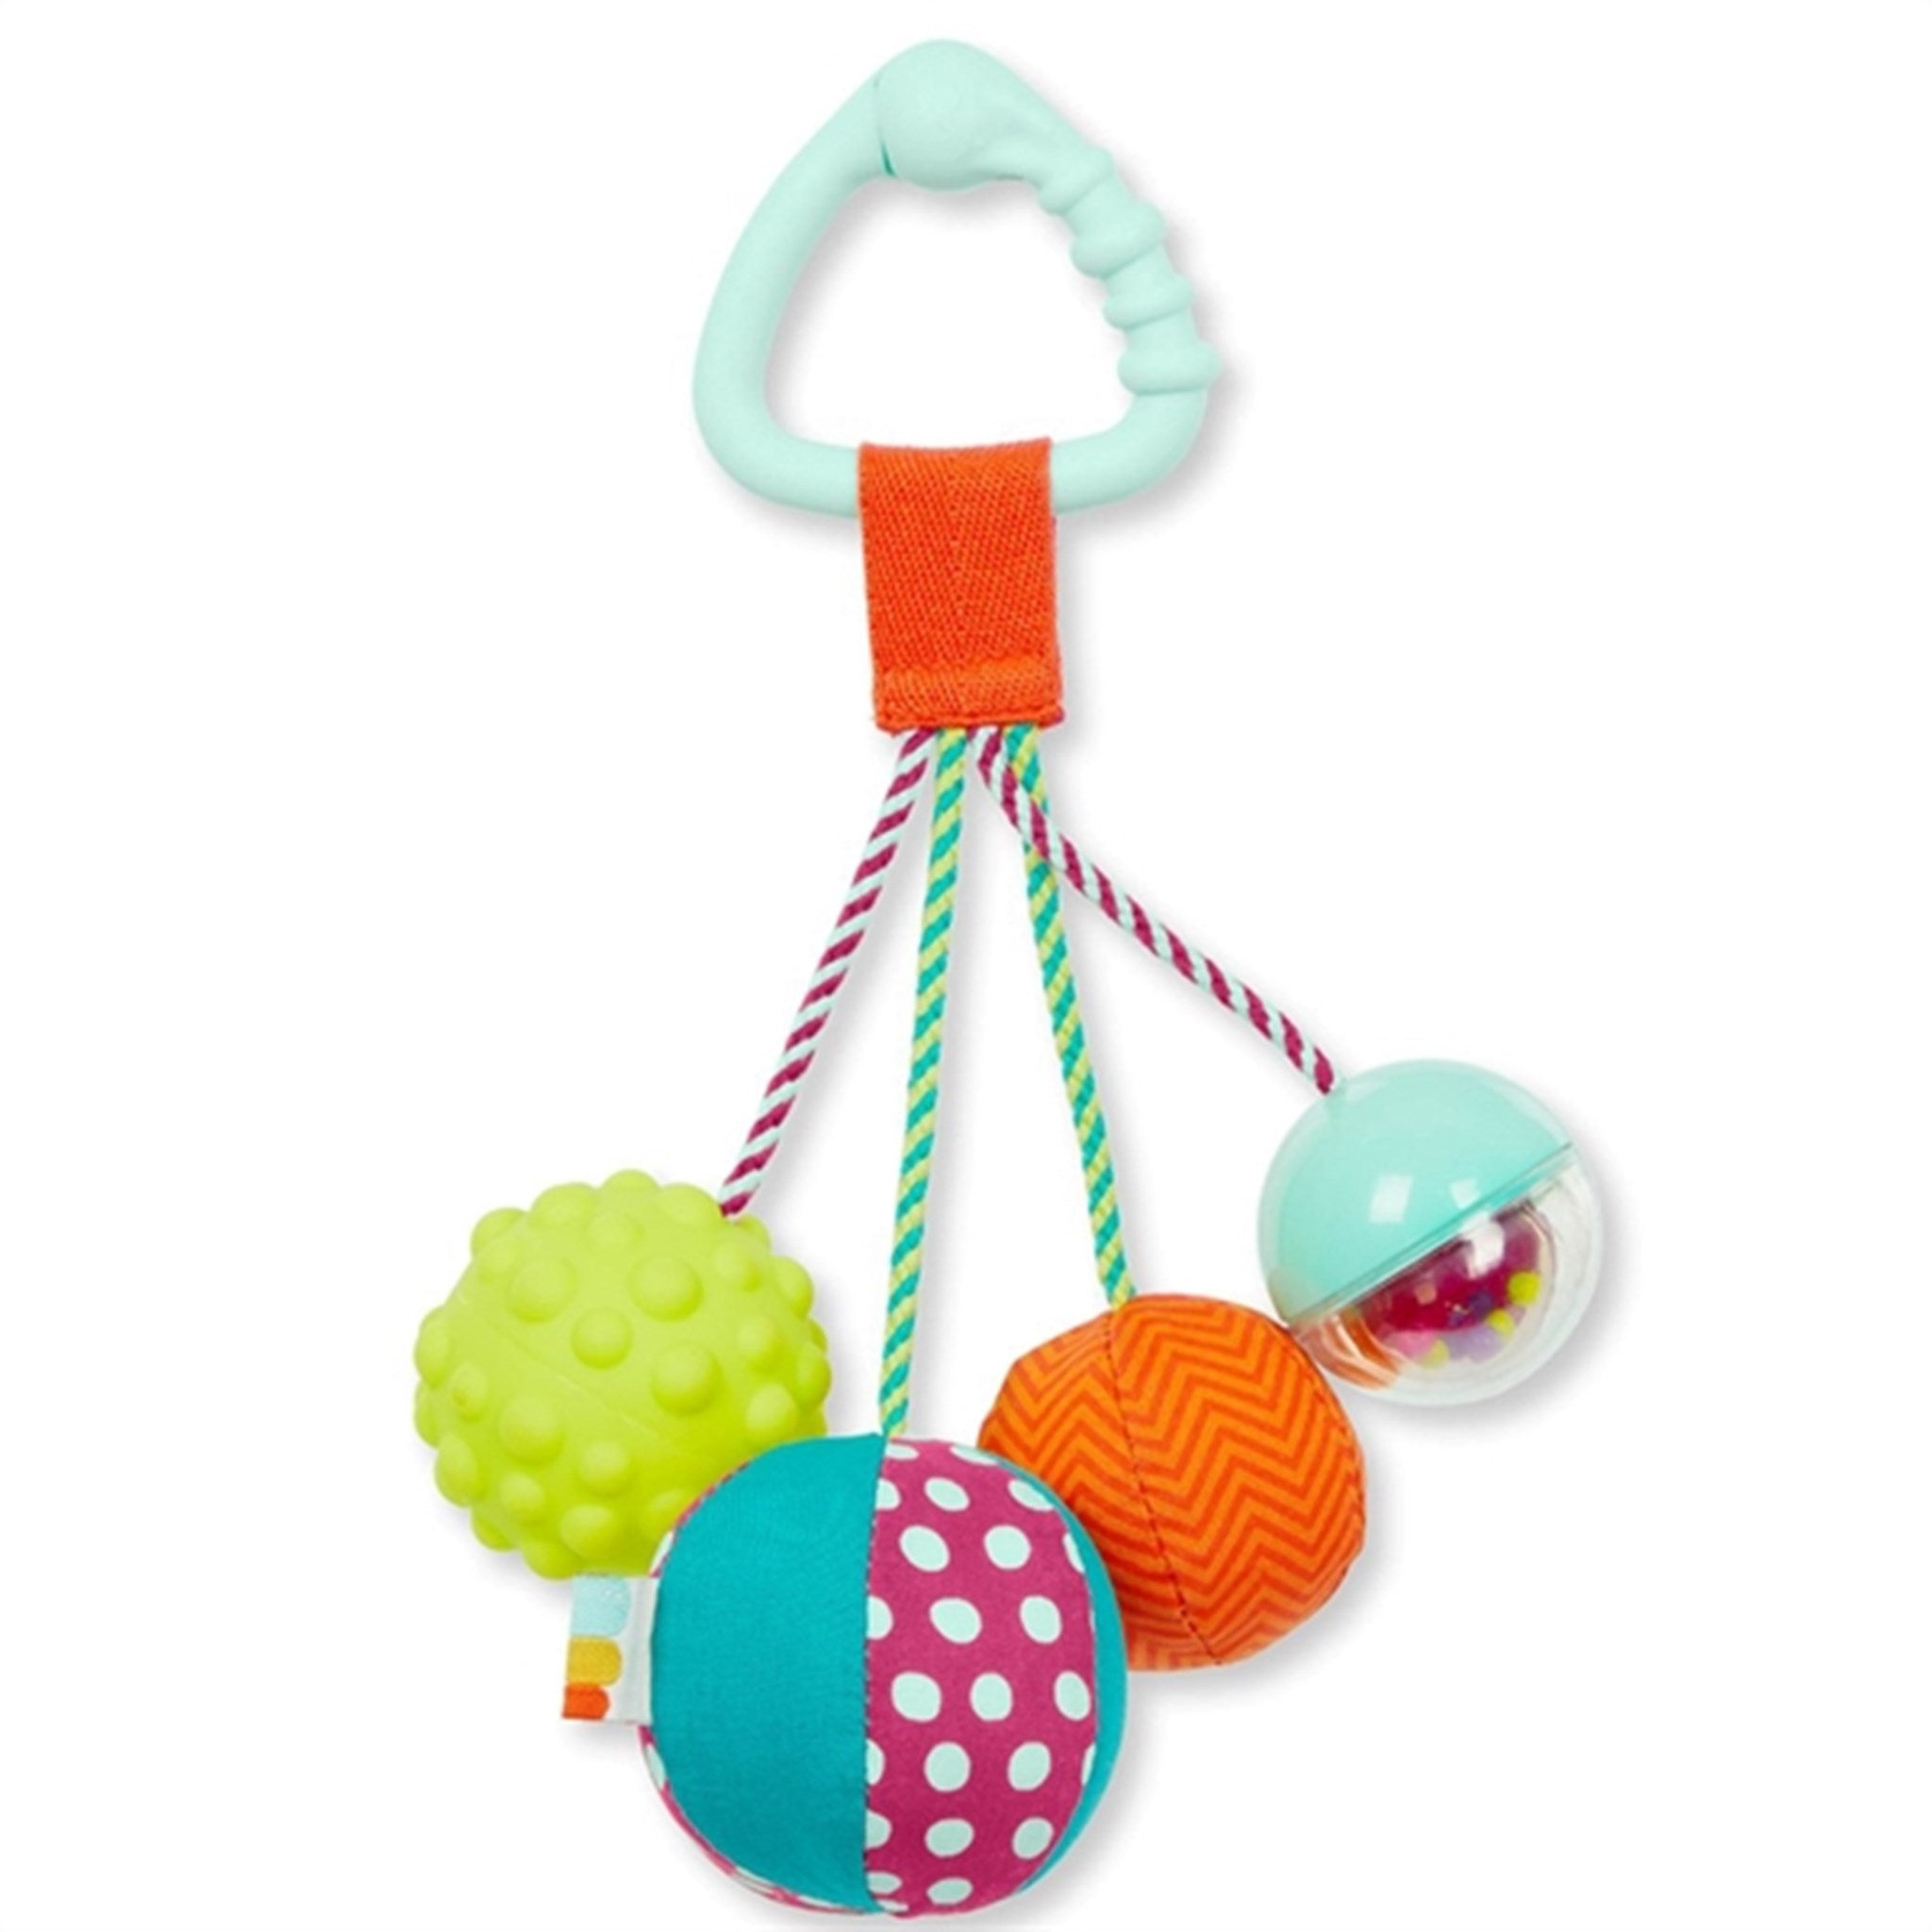 B-toys Sounds So Squeezy - Rattle Balls